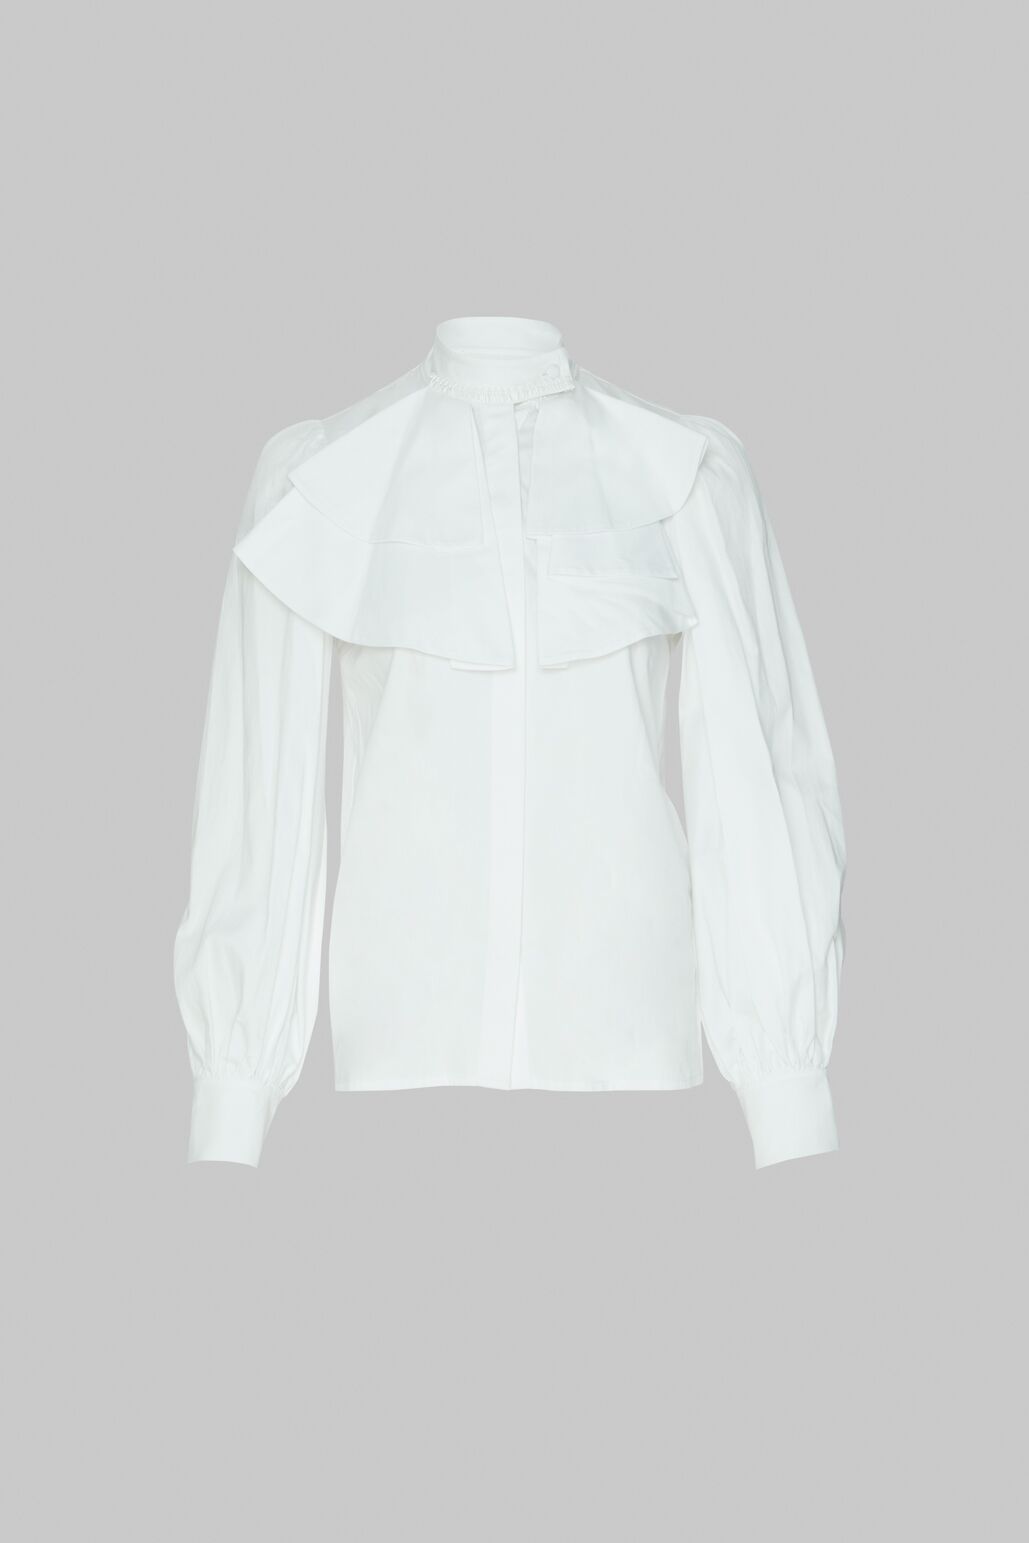  GIZIA - With Volan Detailed Embroidered Collar White Shirt